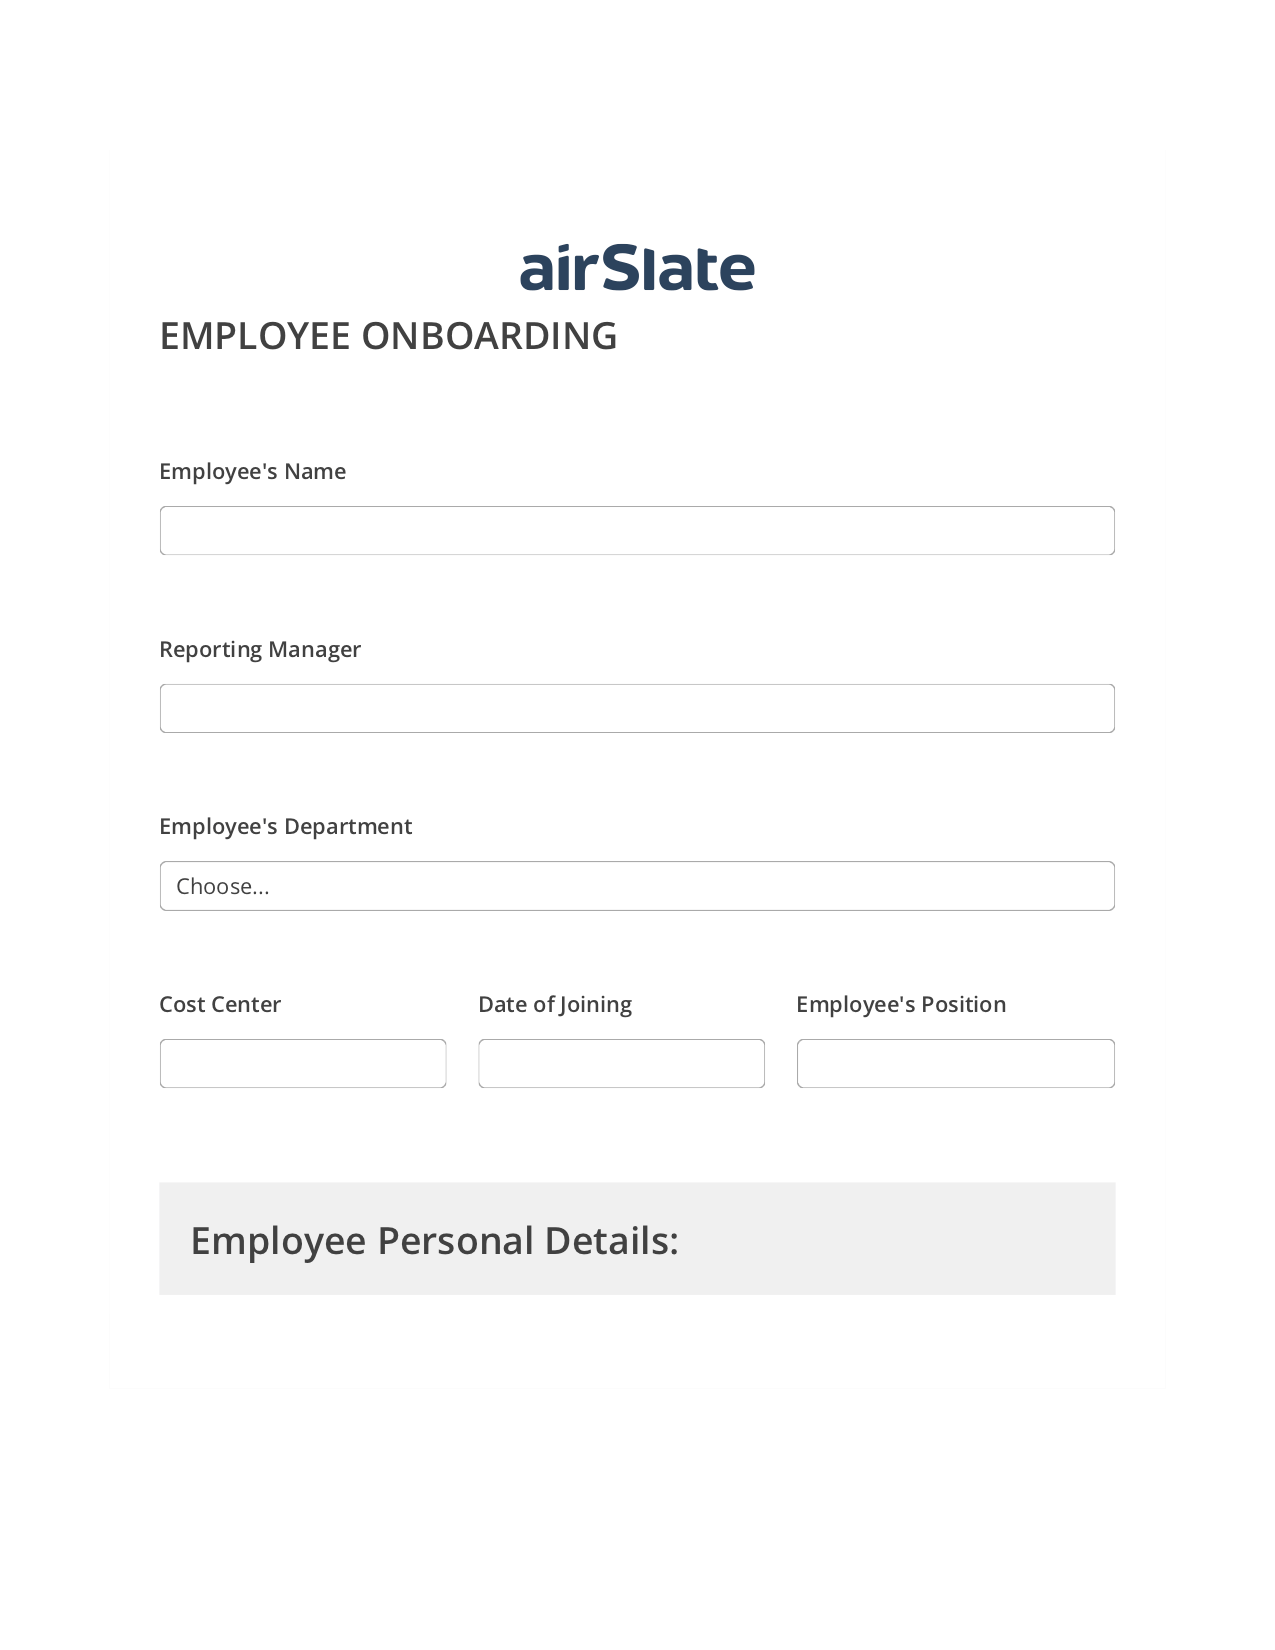 Employee Onboarding Workflow Pre-fill from CSV File Dropdown Options Bot, Unassign Role Bot, Slack Notification Postfinish Bot